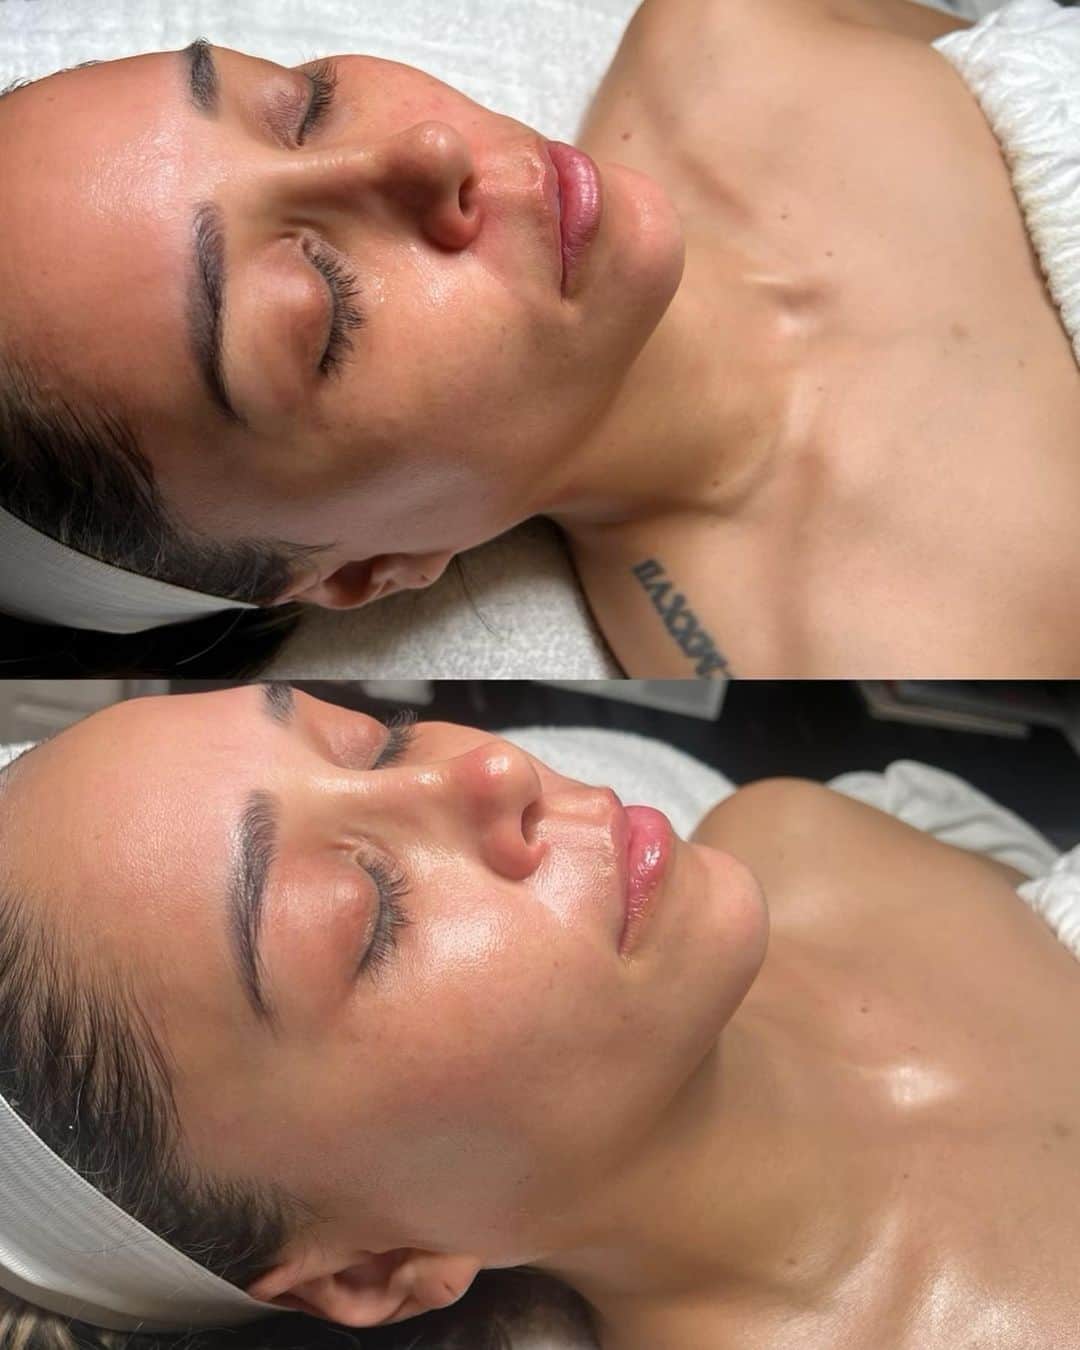 Tianna Gregoryのインスタグラム：「Ultimate Signature Facial: ✨ with @artisanofskinbh   1. Cleanse & Renew: Customized resurfacing peel to clear buildup, build collagen, and tighten skin.  2.Diamondglow Detailing: Removes dead skin, clears congestion, and infuses rejuvenating serum for deep hydration.  3. CO2 Lift Mask Magic: Plumps, tightens, repairs, and erases redness, fine lines, and wrinkles instantly.  4. LED Light Therapy: Reduces inflammation, tightens, tones, minimizes pores, and gives a gorgeous glass skin glow.  5. Maintain Results: Personalized skincare routine update for long-lasting radiance.  Get ready to glow like never before! ✨💆🏻‍♀️💕」